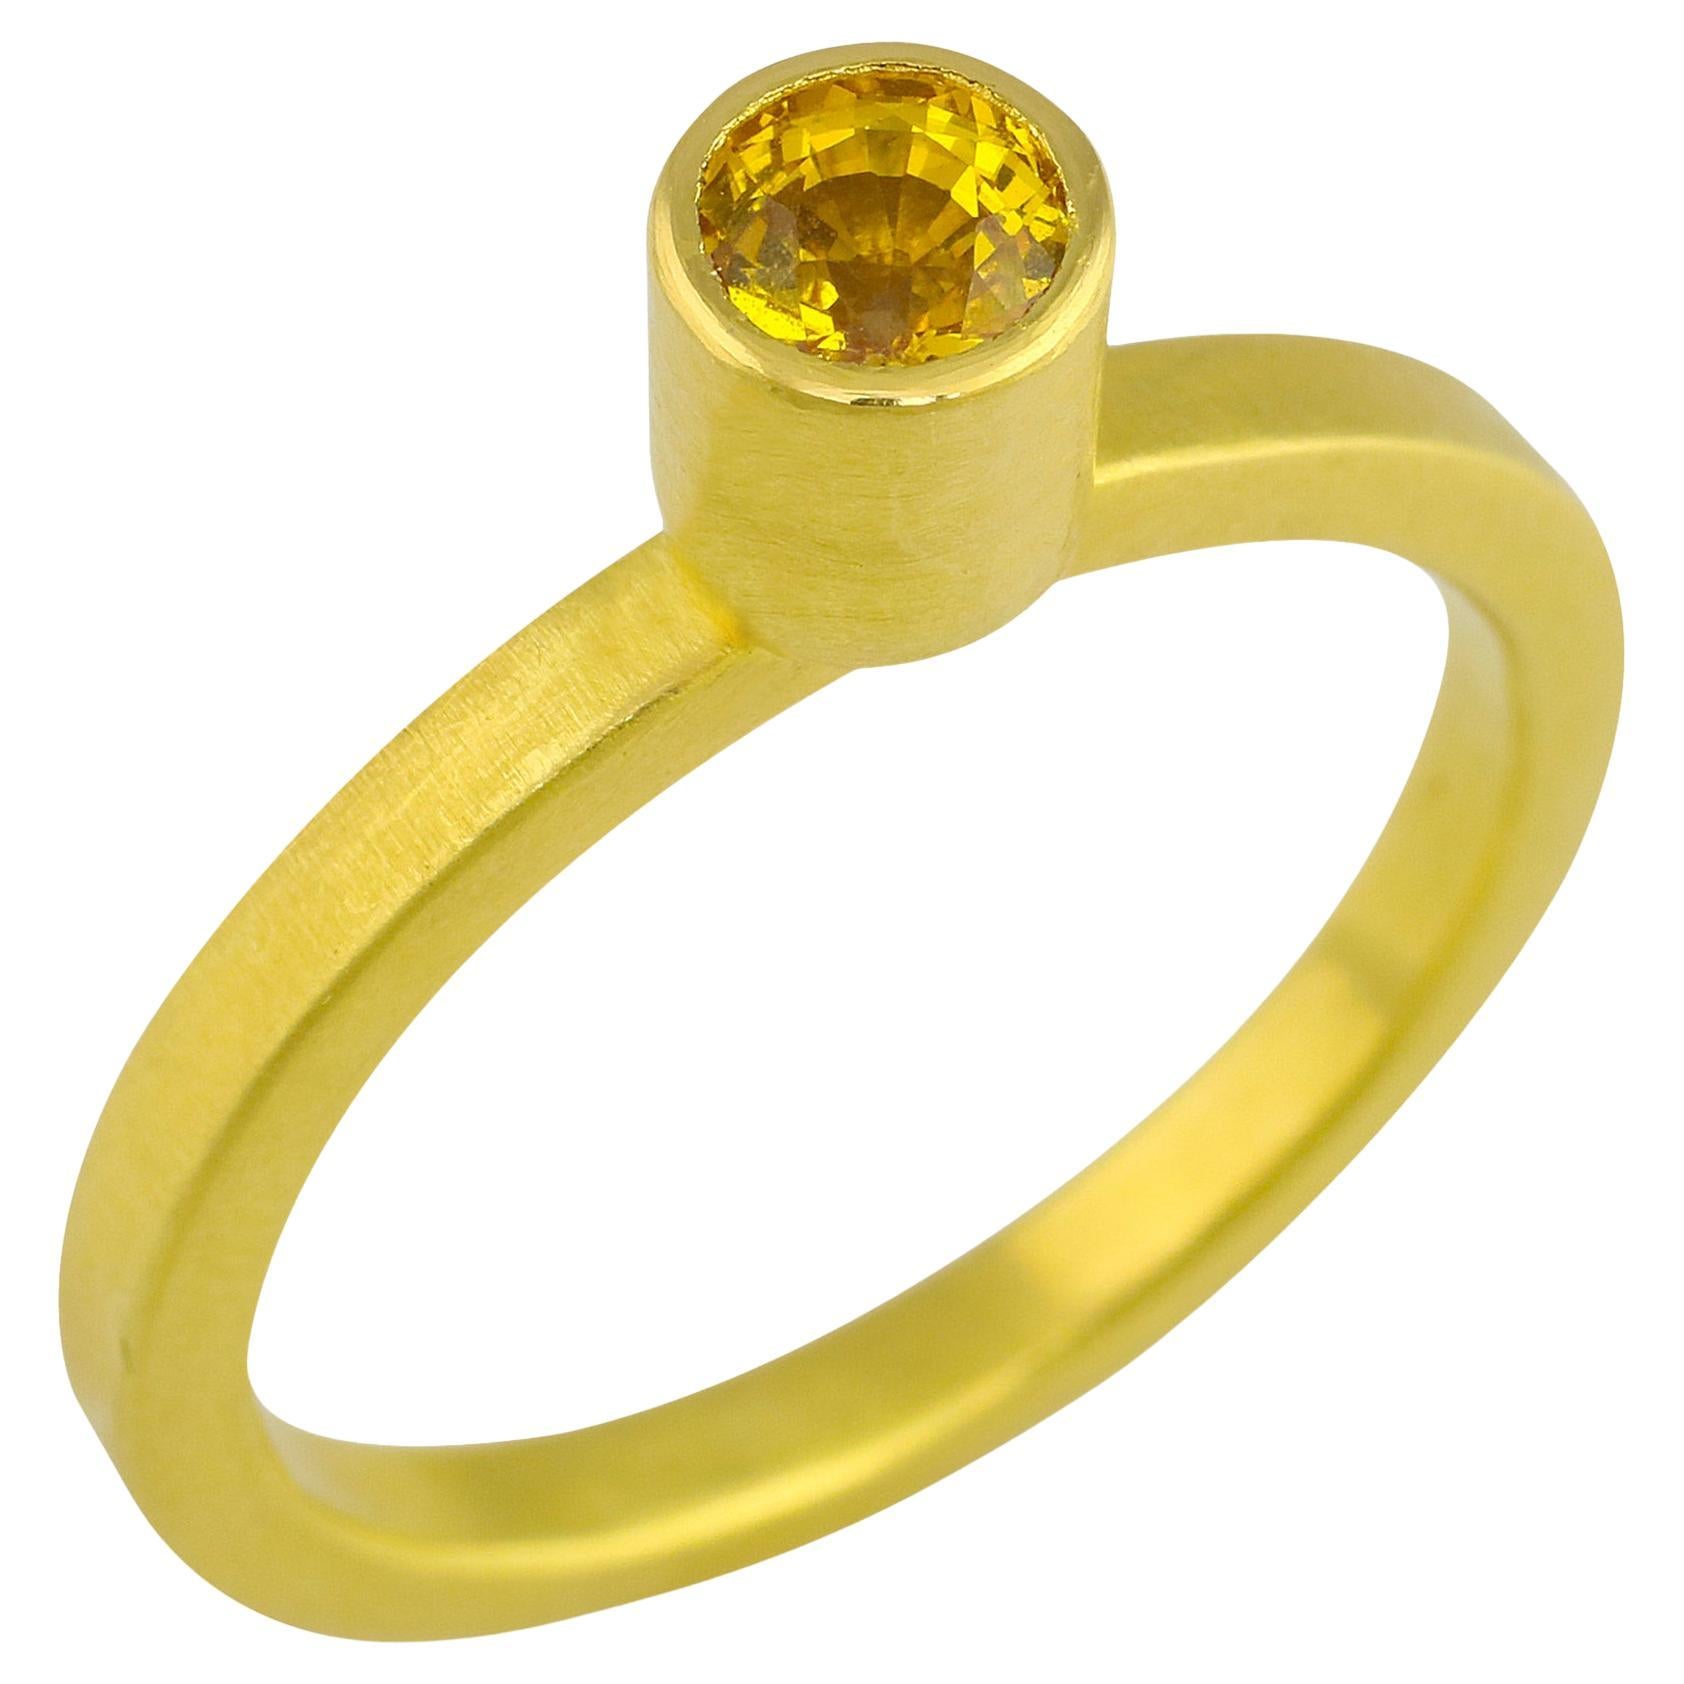 PHILIPPE SPENCER .65 Ct. Yellow Sapphire in 22K and 20K Gold Solitaire Ring